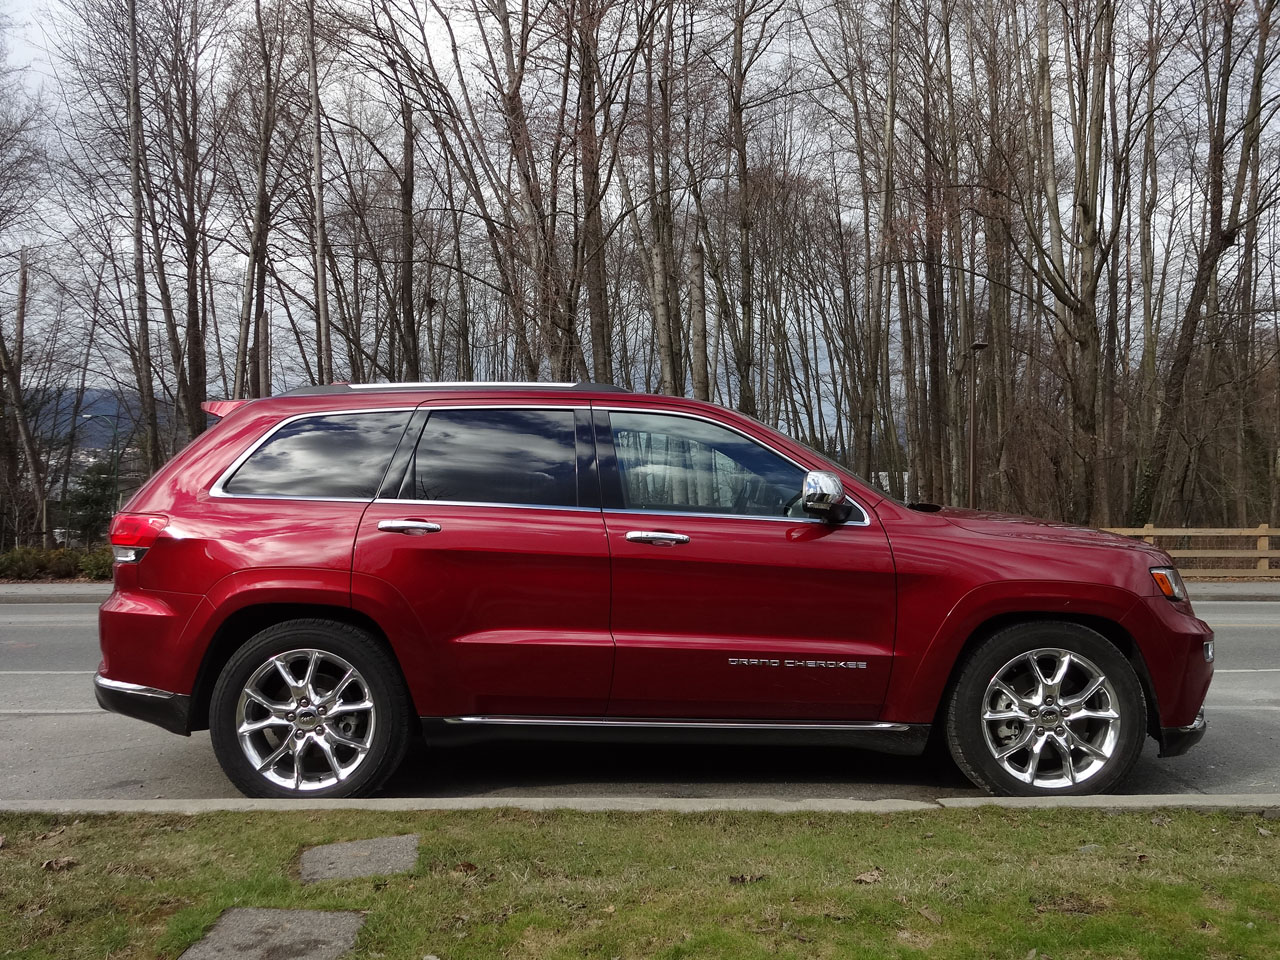 2014 Jeep Grand Cherokee Summit Ecodiesel Road Test Review The Car